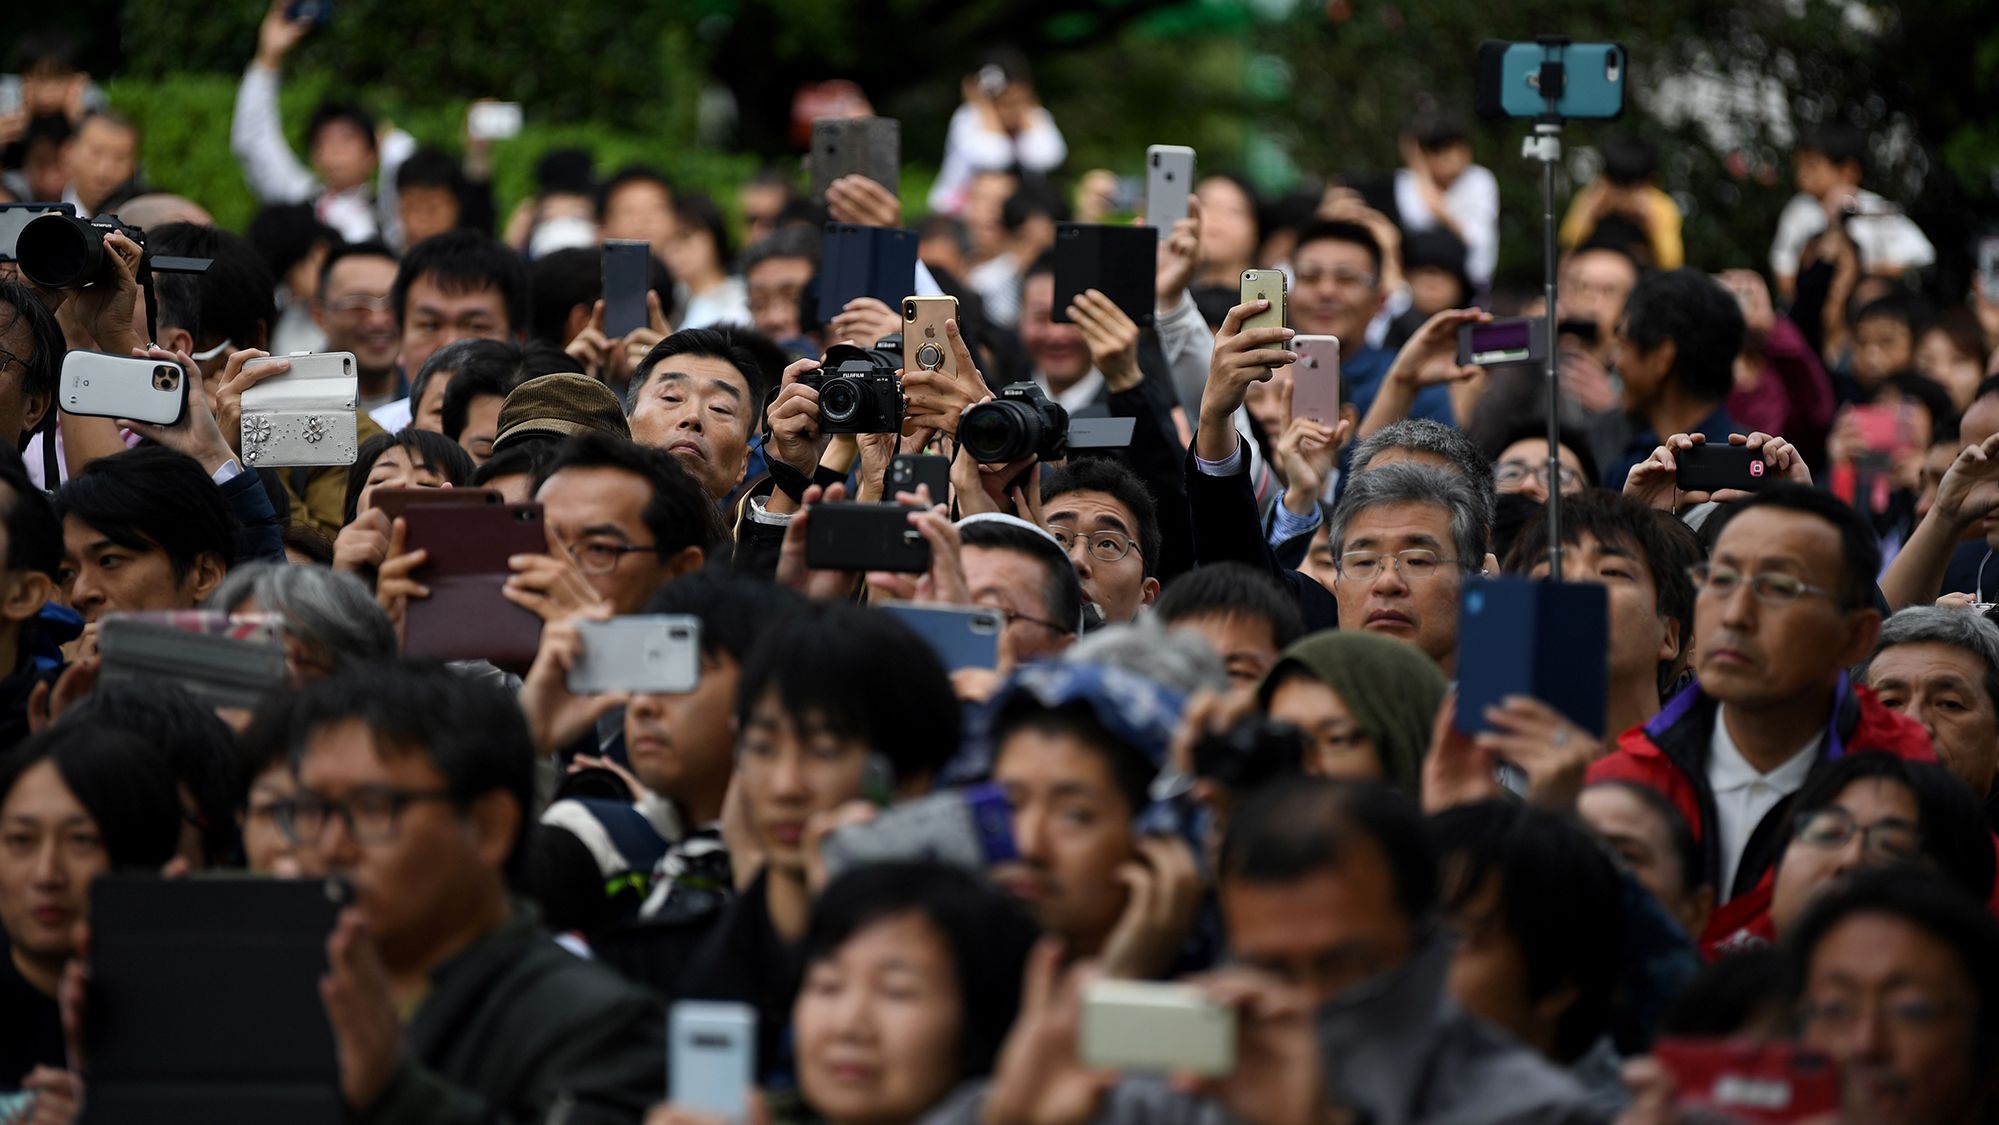 A crowd gathers to watch firing artilleries marking Japan's Emperor Naruhito's enthronement.